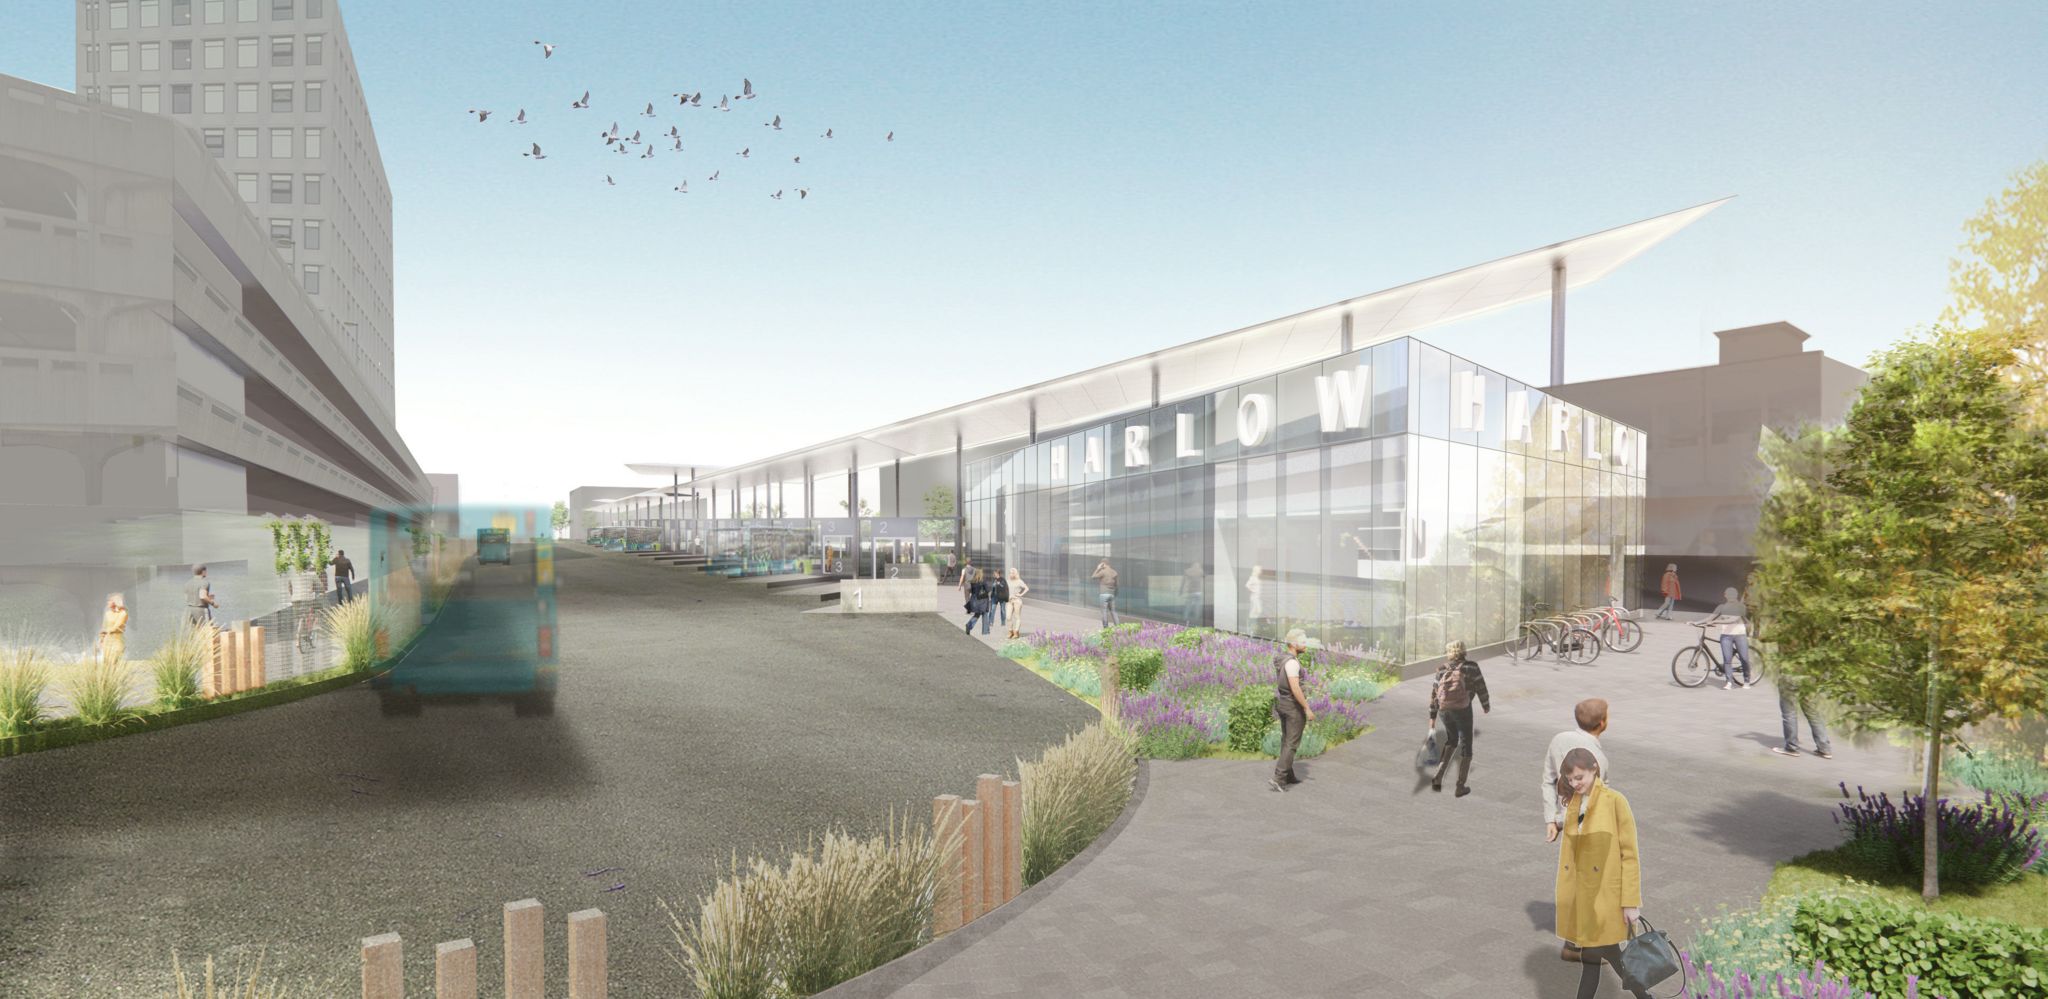 An artist's impression of the redevelopment due at Harlow bus station